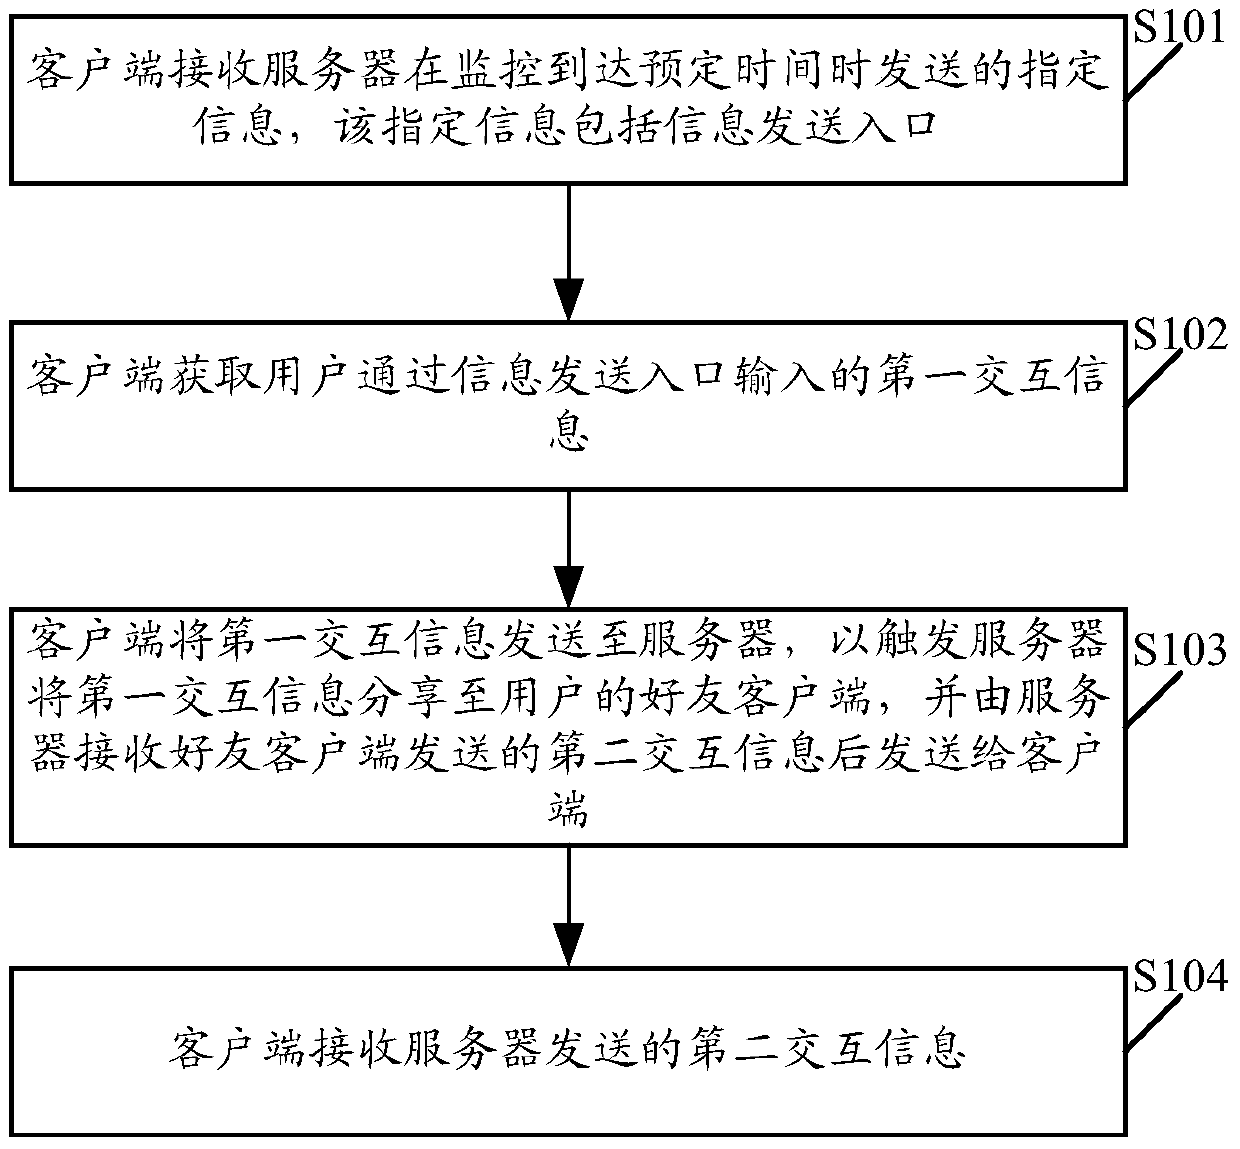 A method and system for information interaction